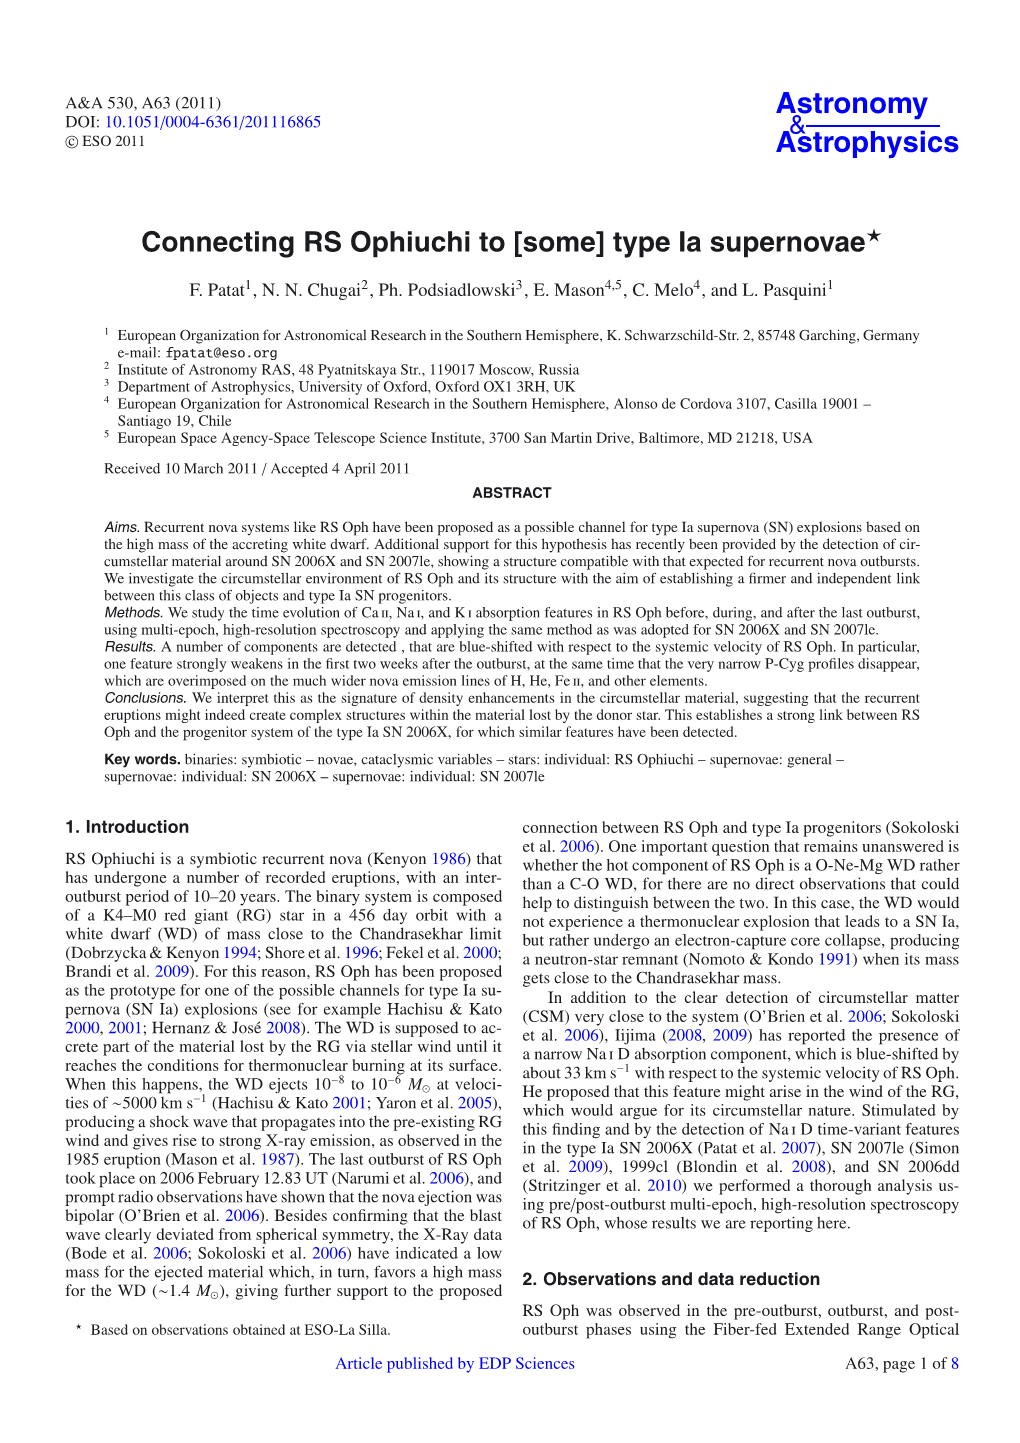 Connecting RS Ophiuchi to [Some] Type Ia Supernovae